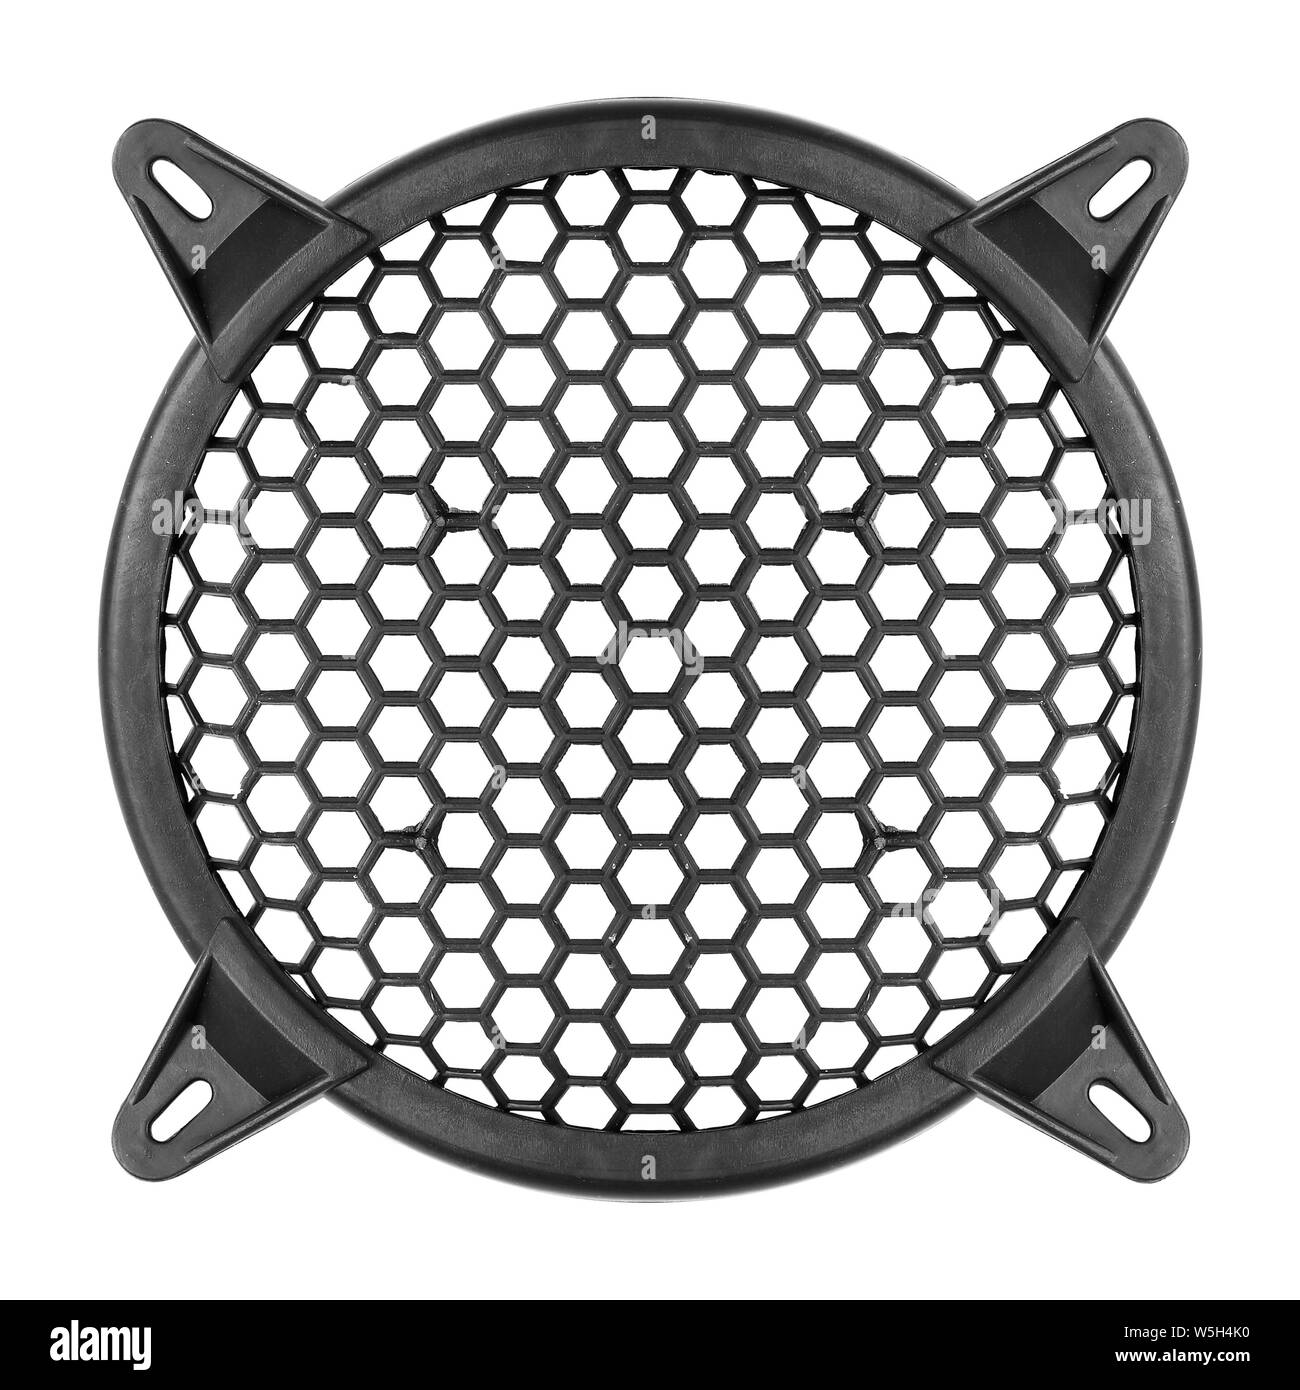 Music and sound - Speaker grill cover decorative circle plastic mesh isolated on a white backgrounf Stock Photo